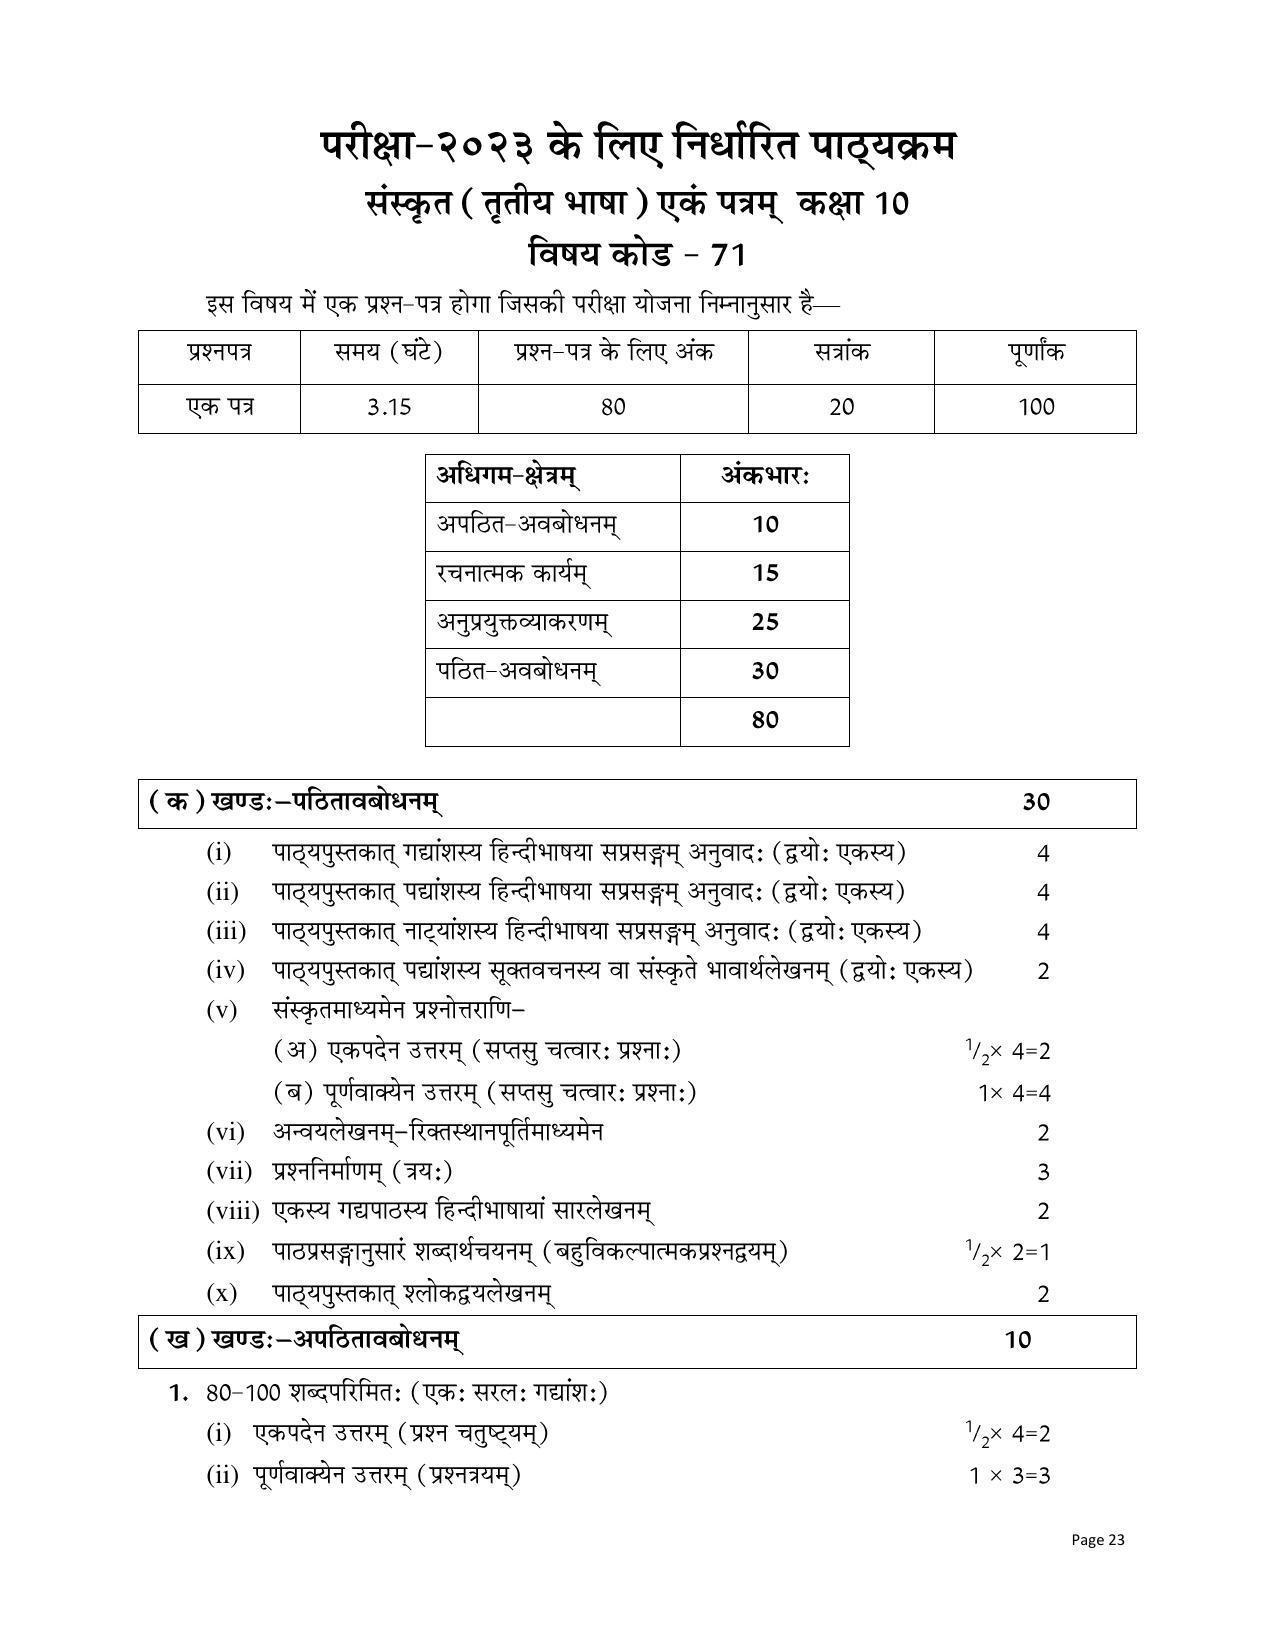 RBSE Class 10 Complete Syllabus 2023 - Page 23